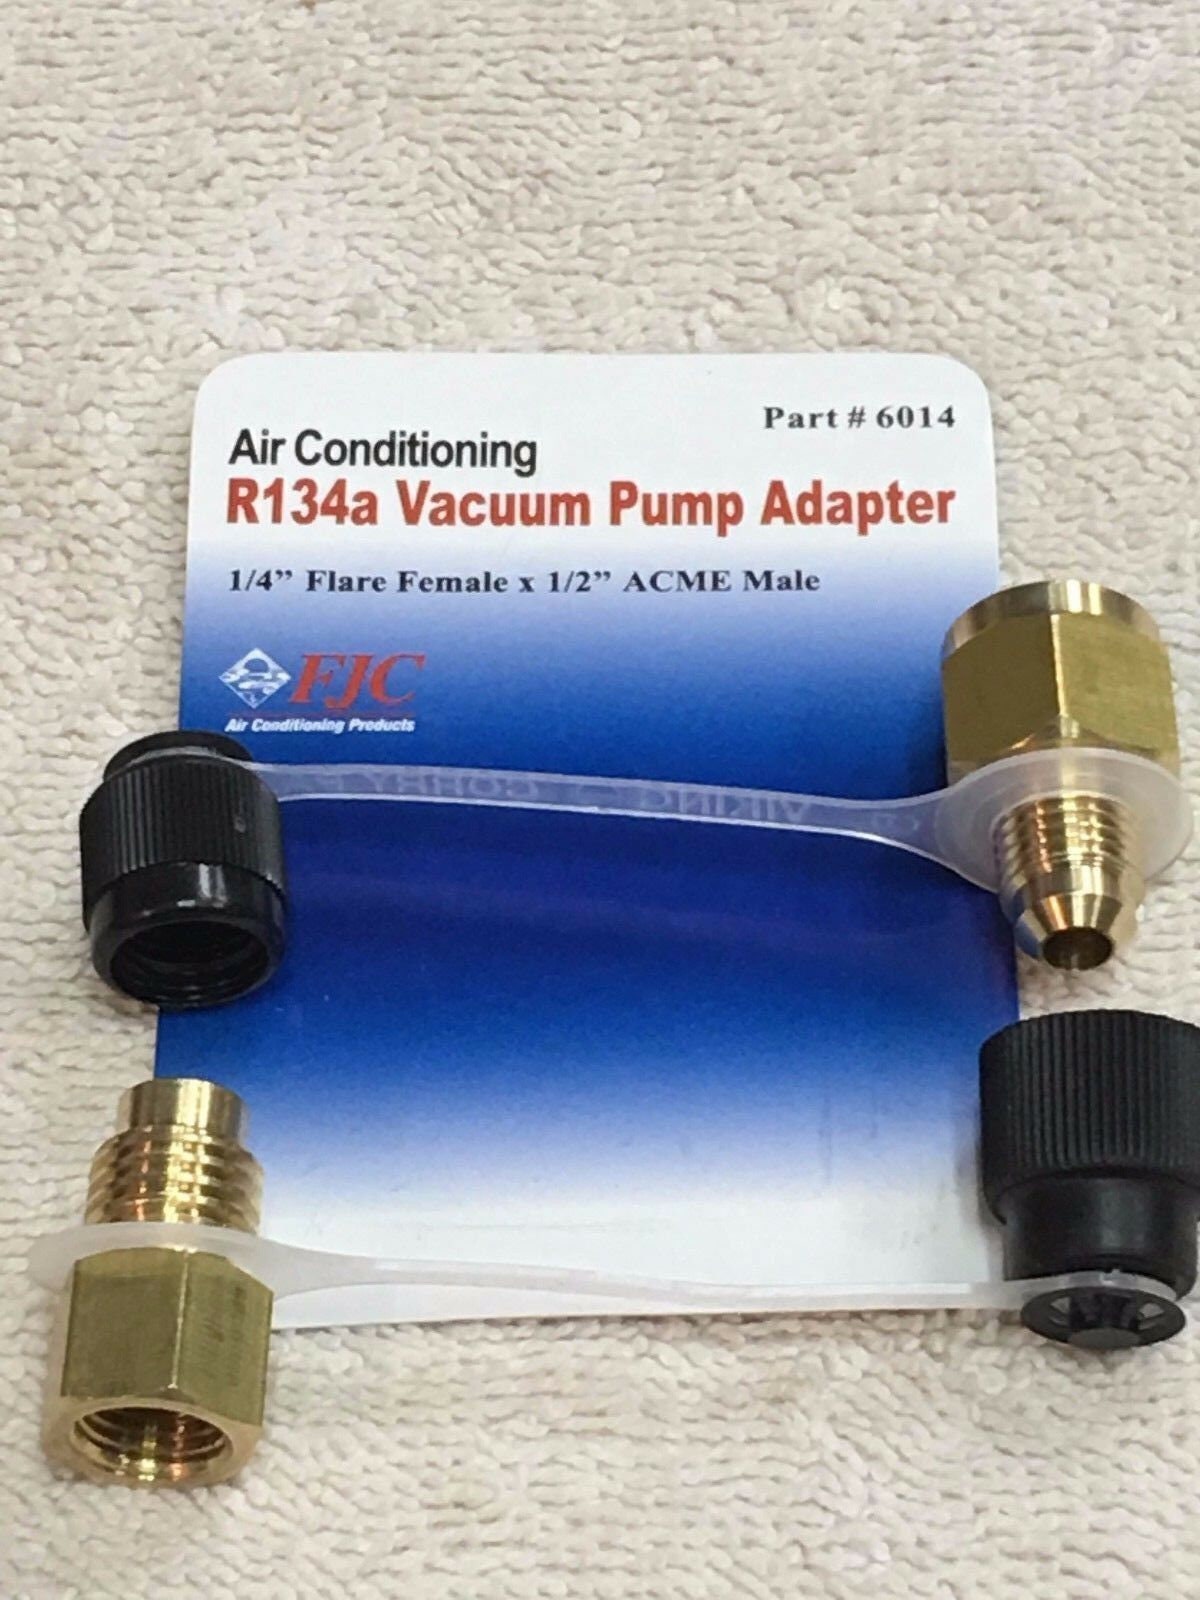 FJC 6014 R134a Vacuum Pump Adapter for sale online 